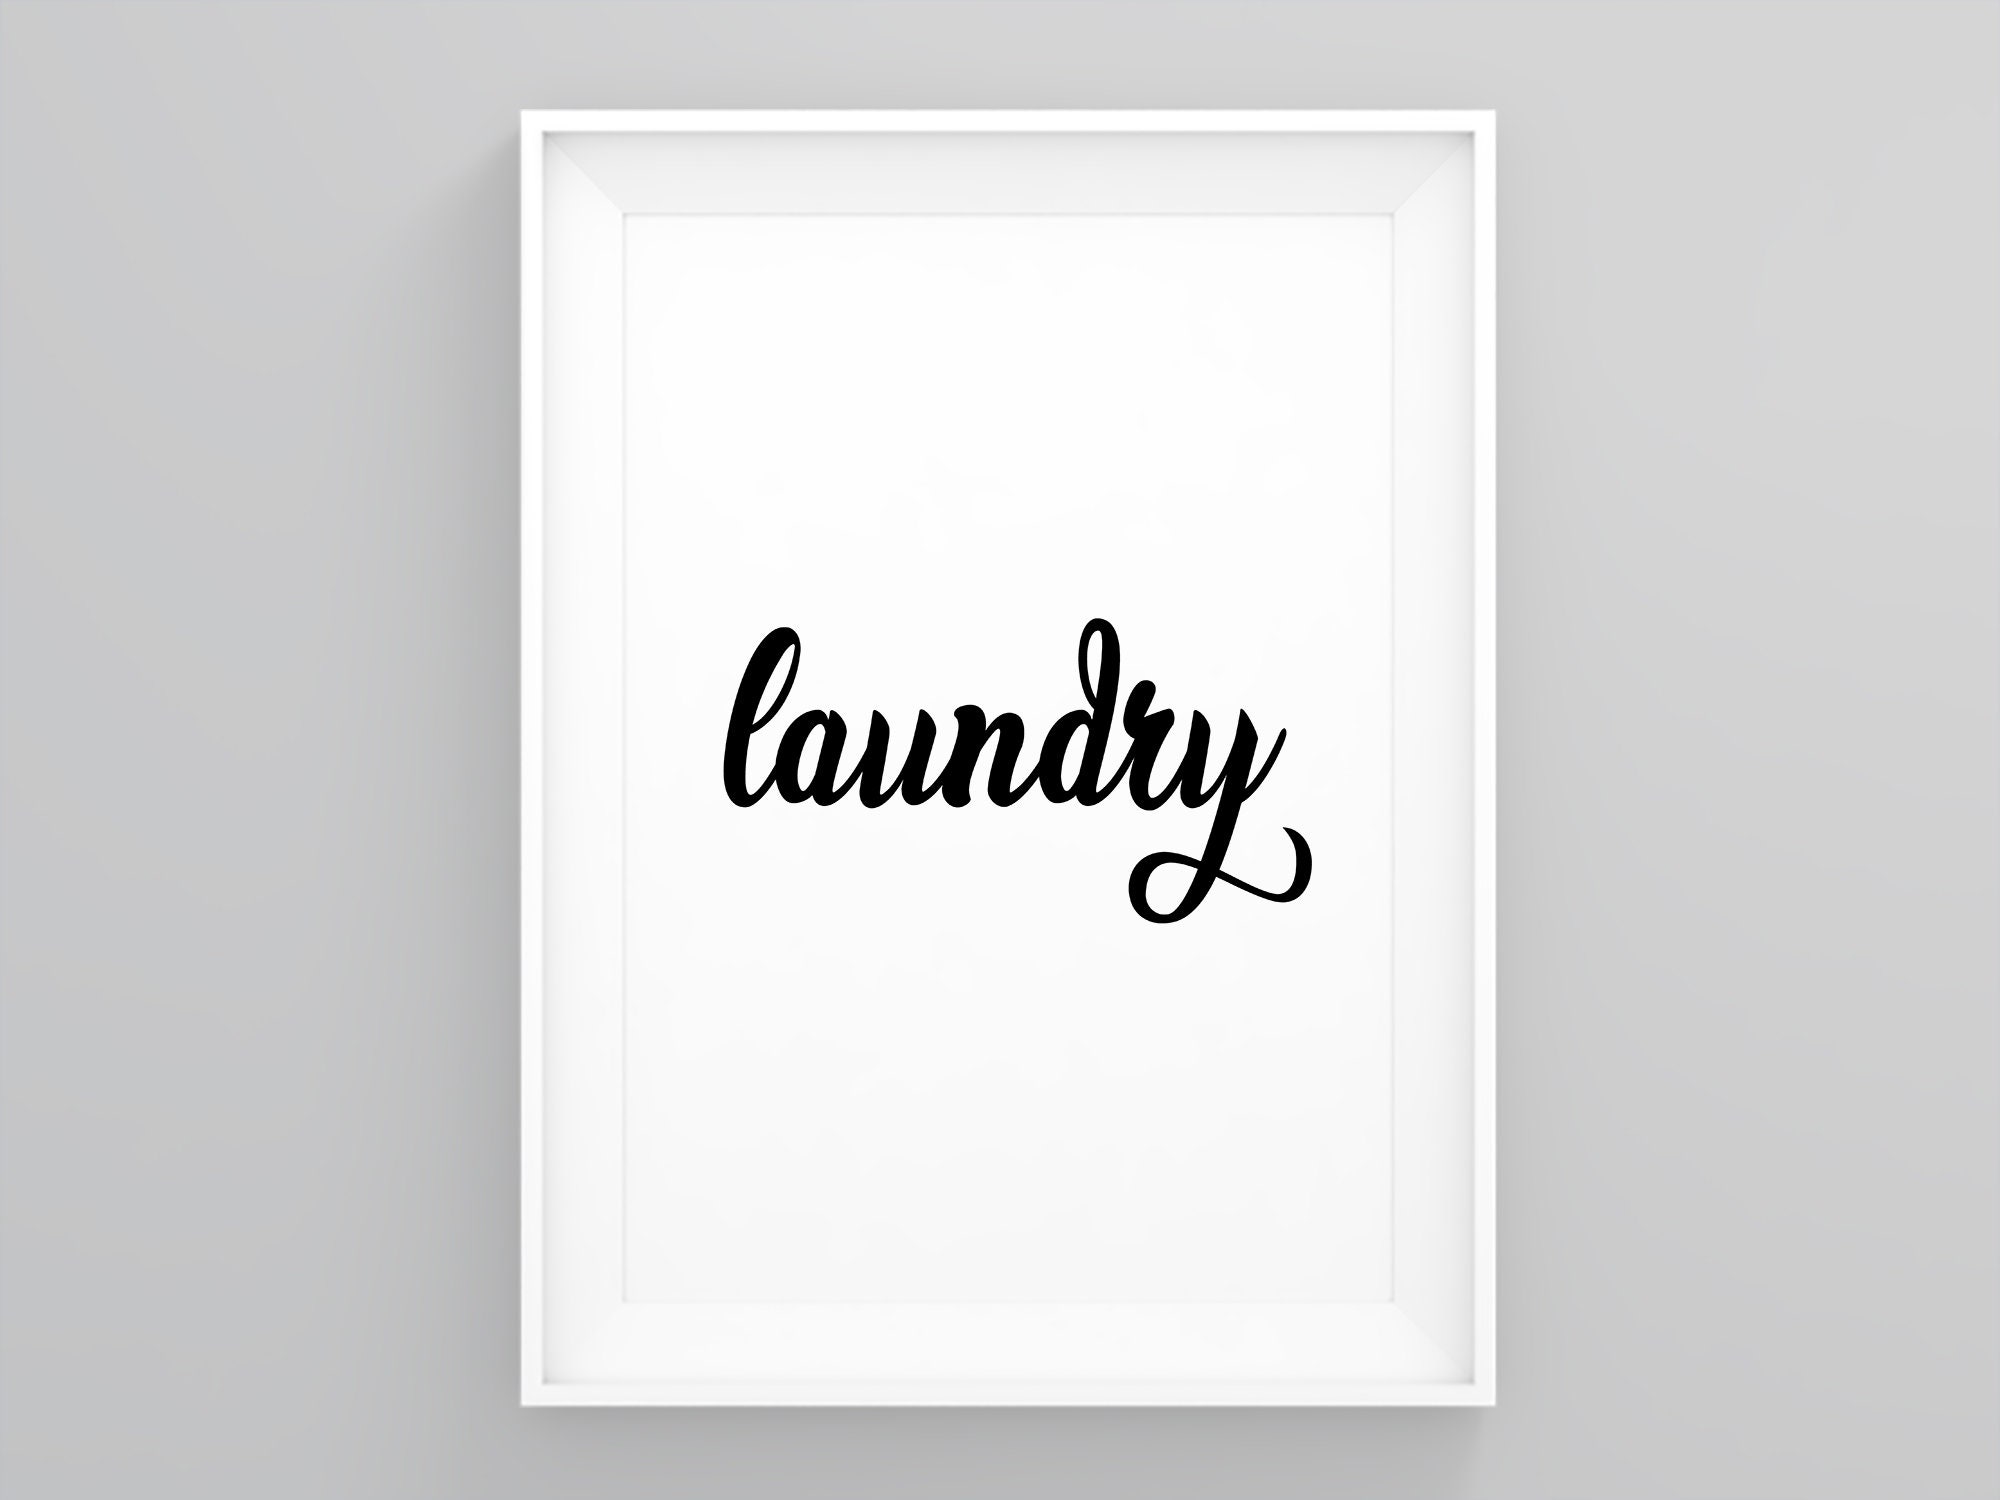 Details about   Laundry Quote Fold Faff Fold Washing Room Sign House Print Framed Posters Art 